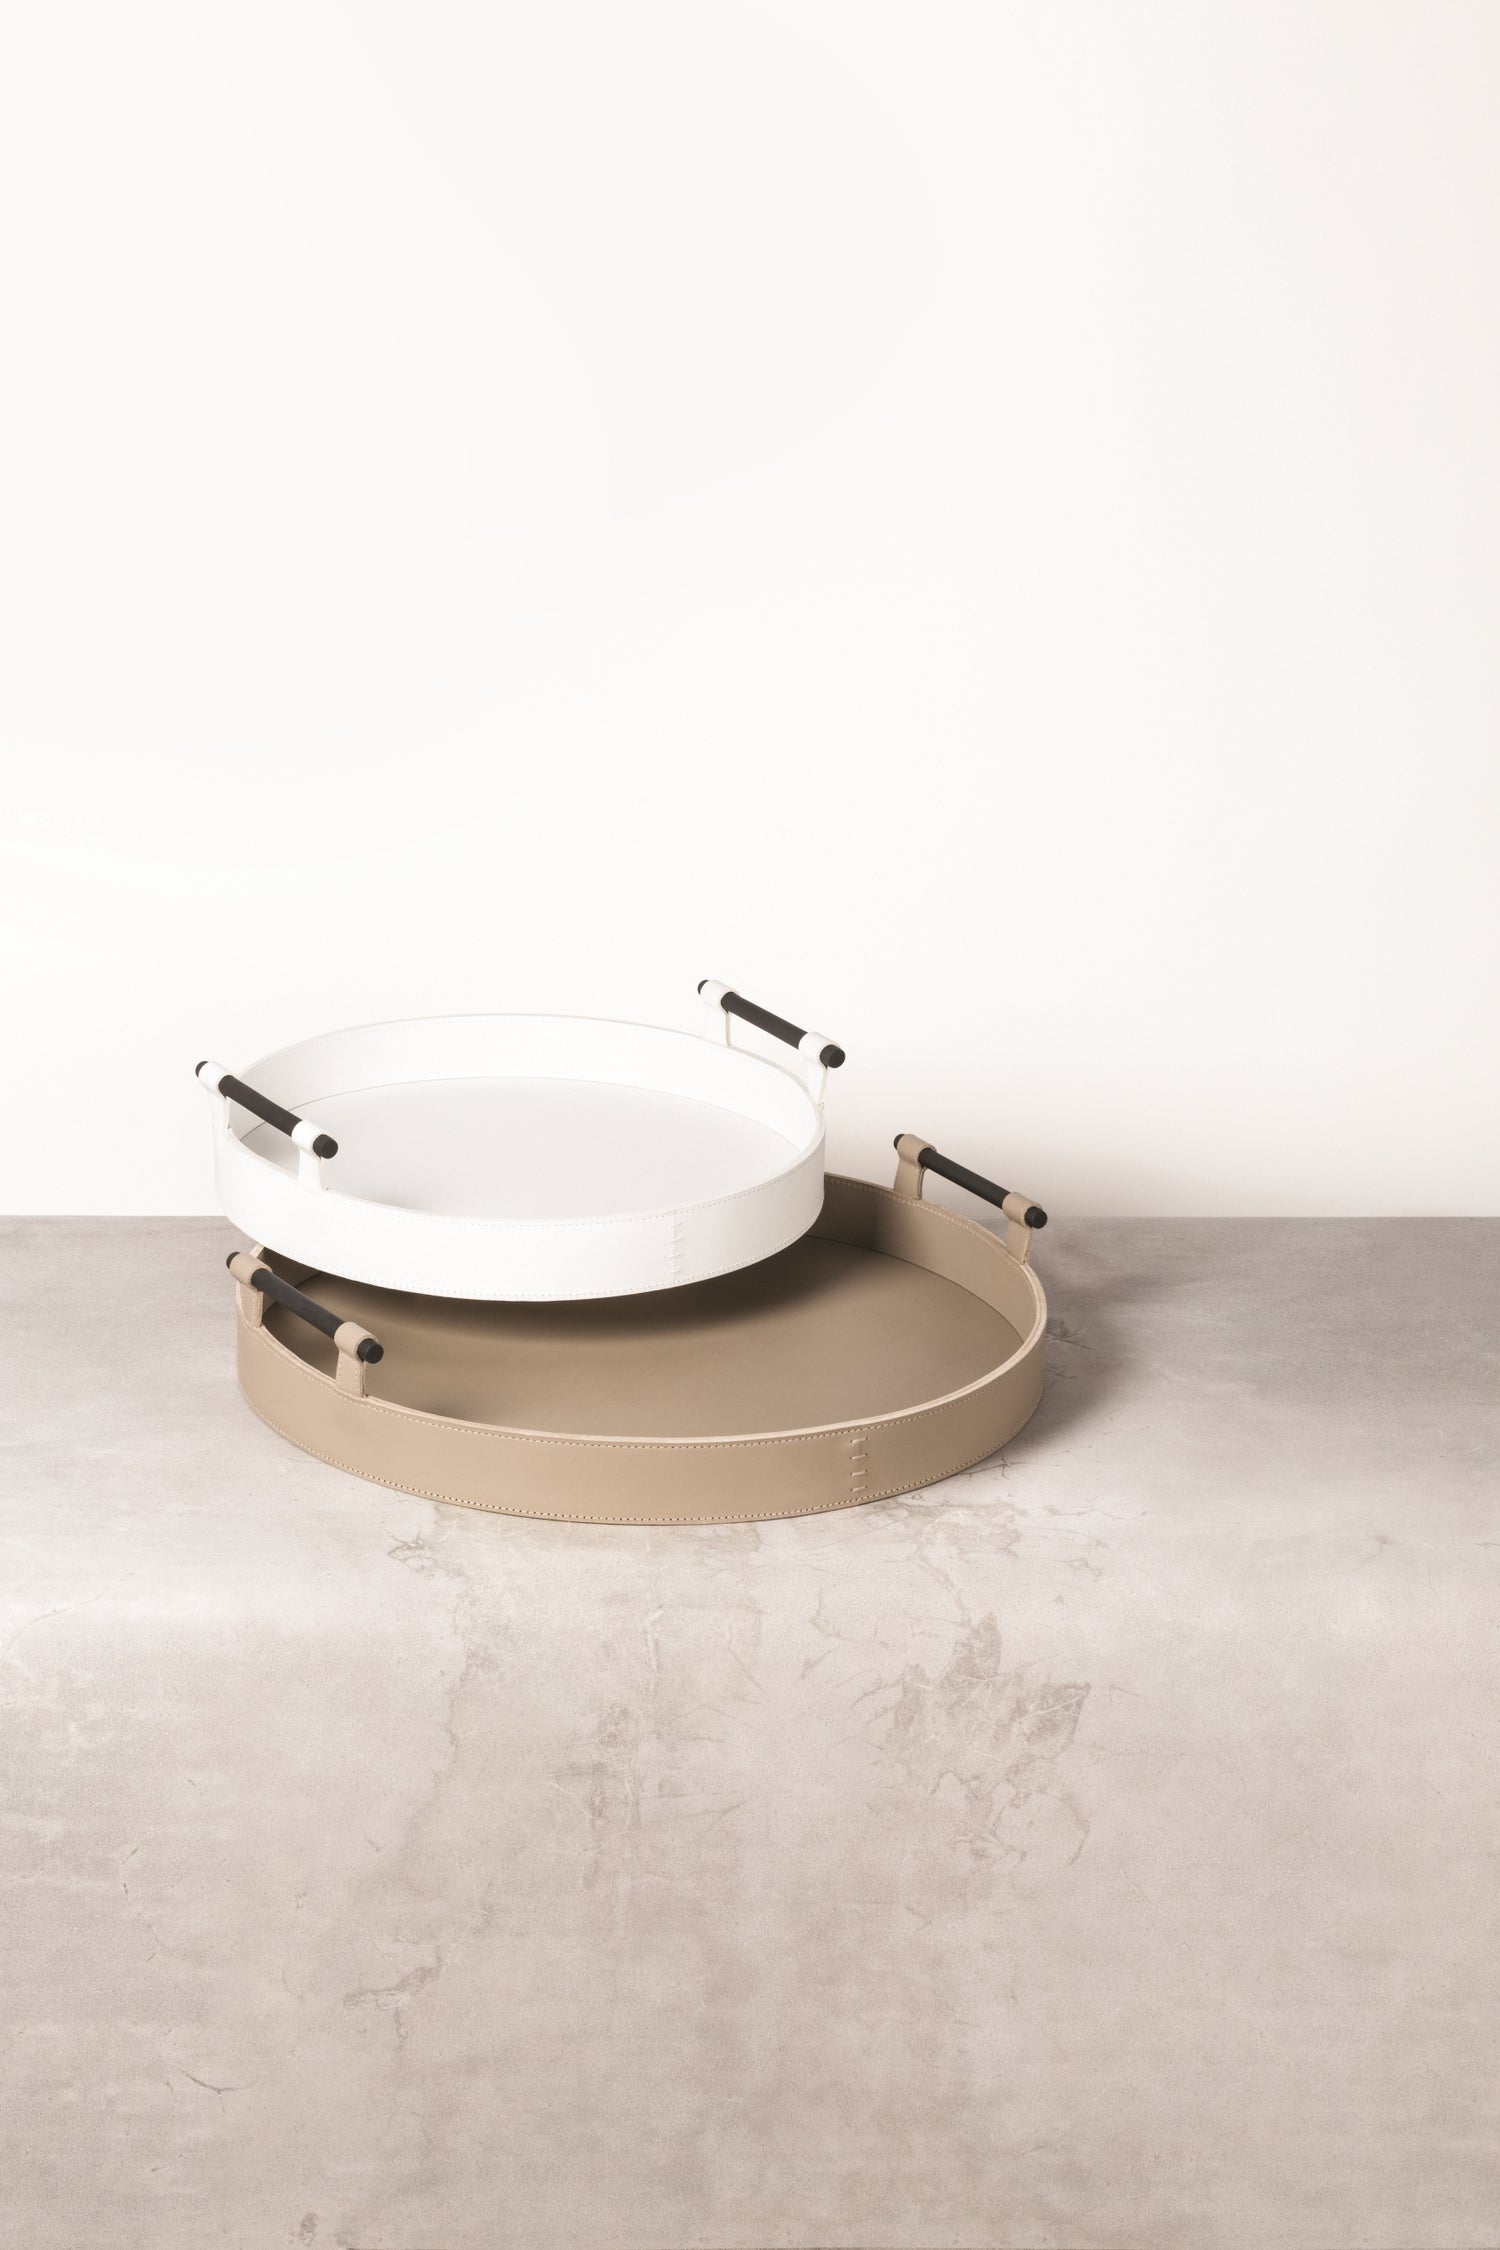 Rabitti 1969 Portofino Round Saddle Leather Tray with Bronze Handles | Elegant and Functional Tray | Crafted with High-Quality Saddle Leather | Bronze Handles for a Touch of Luxury | Explore a Range of Luxury Home Accessories at 2Jour Concierge, #1 luxury high-end gift & lifestyle shop